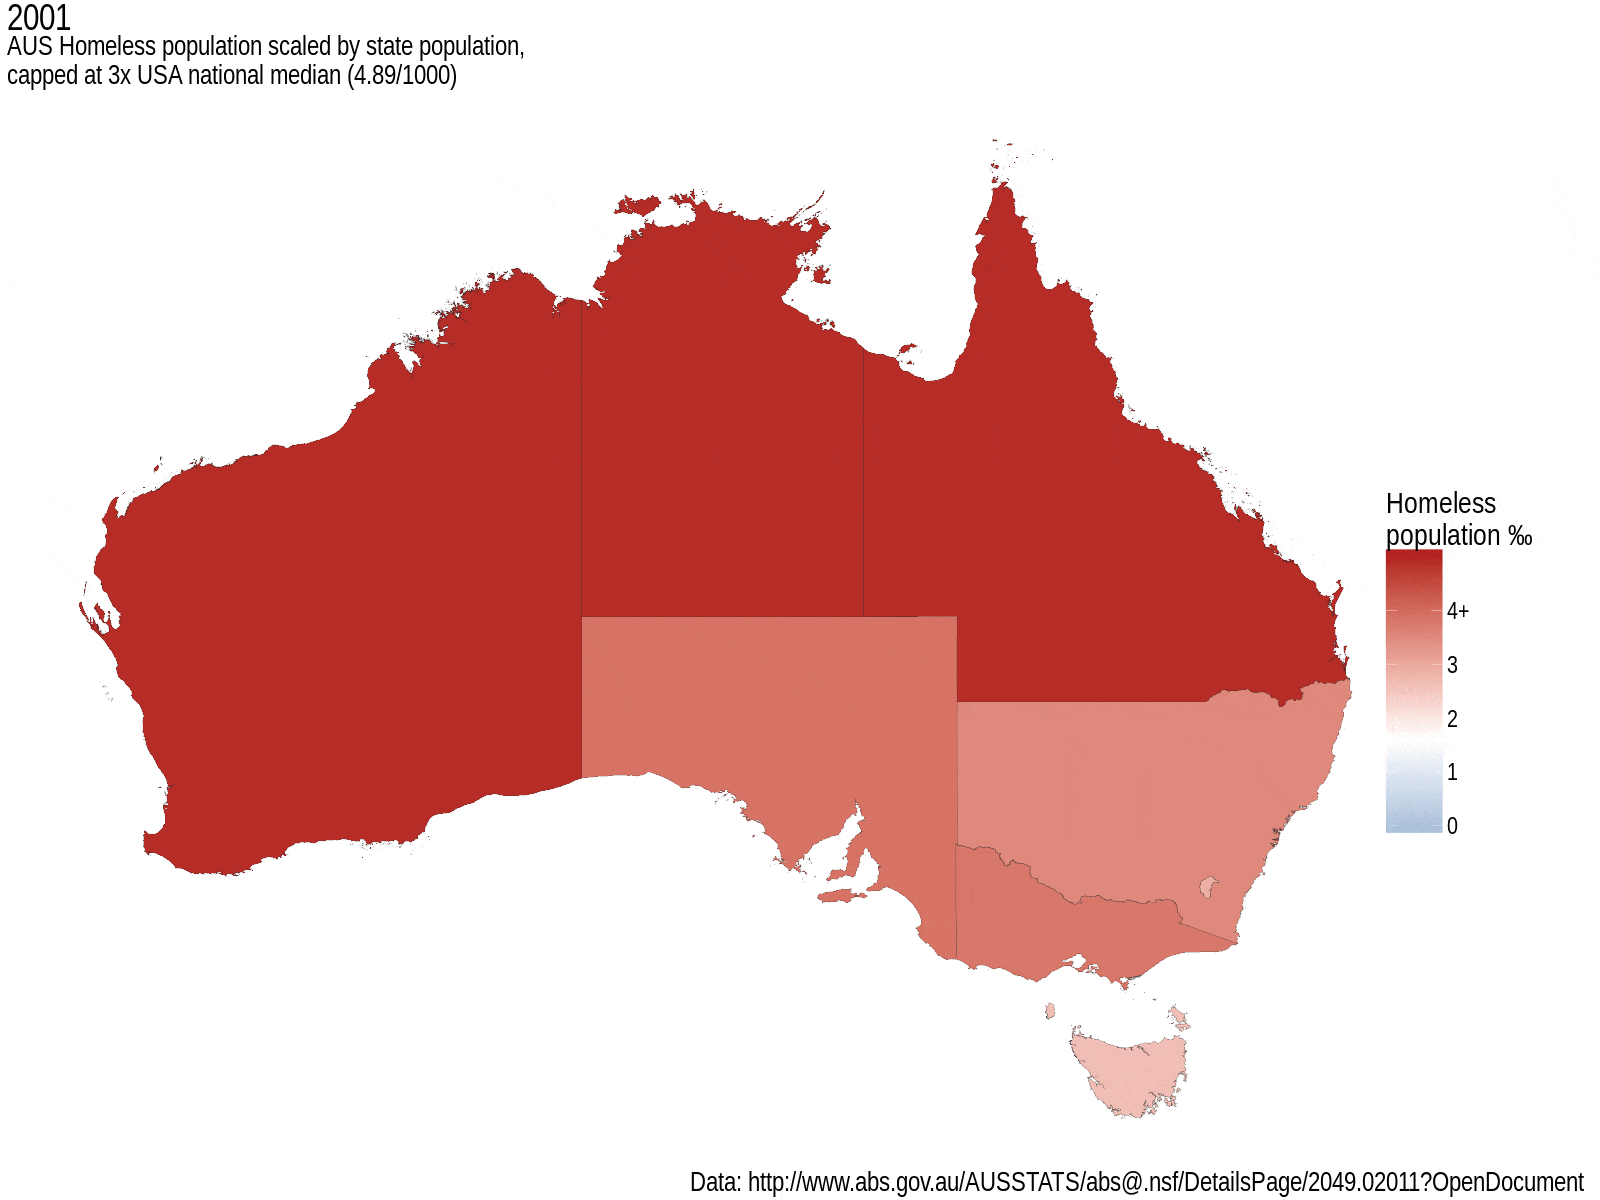 AUS homeless population, US scale